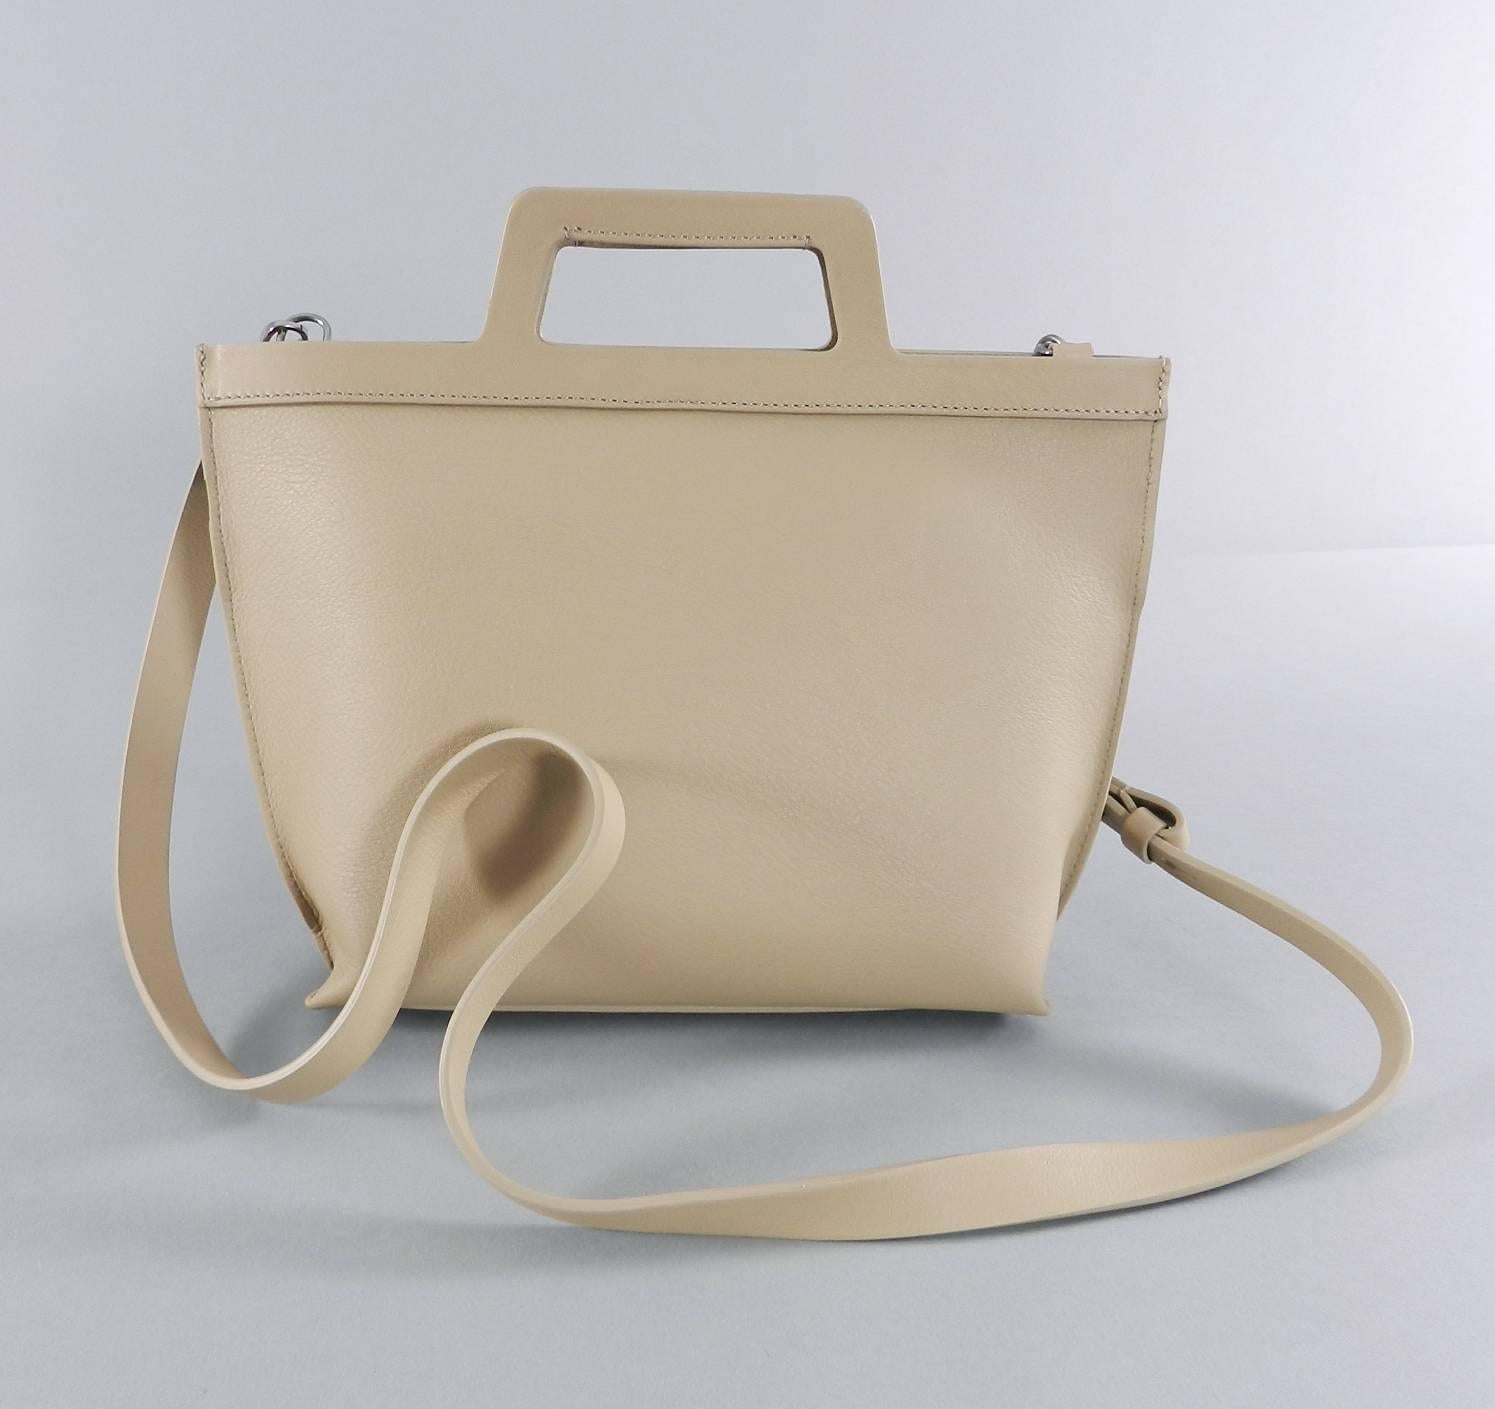 Brunello Cucinelli Beige Leather Bag with Silver Beaded Chain Detail.  Body of bag measures about 12